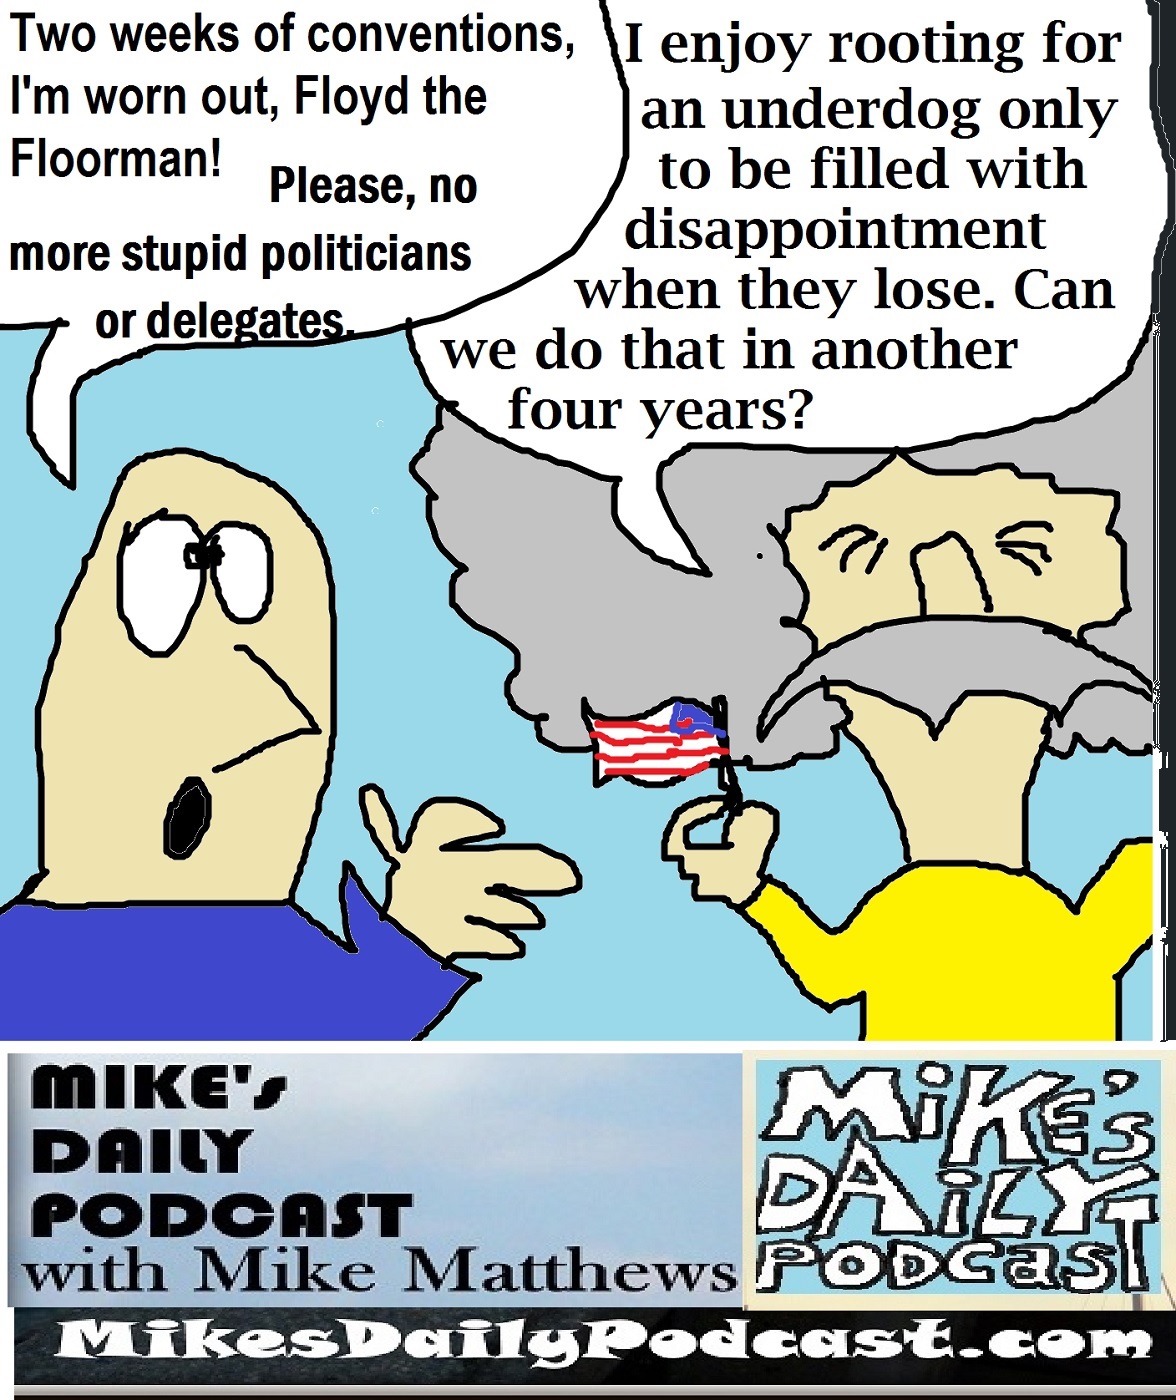 MIKEs DAILY PODCAST 1140 Mikes and Floyd the Floorman flag